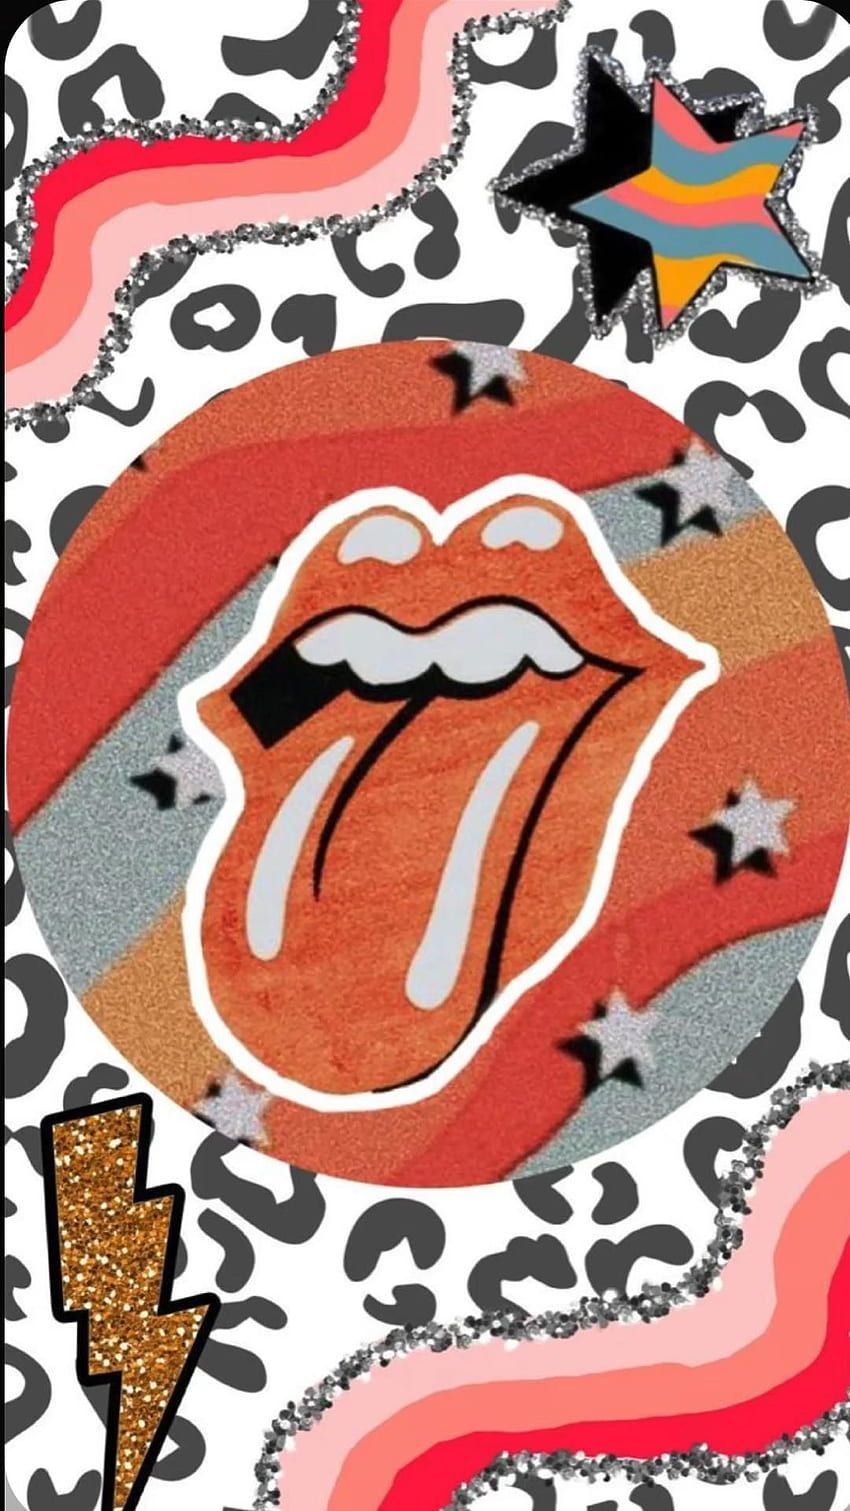 Rolling stones wallpaper for phone and desktop. - Rolling Stones